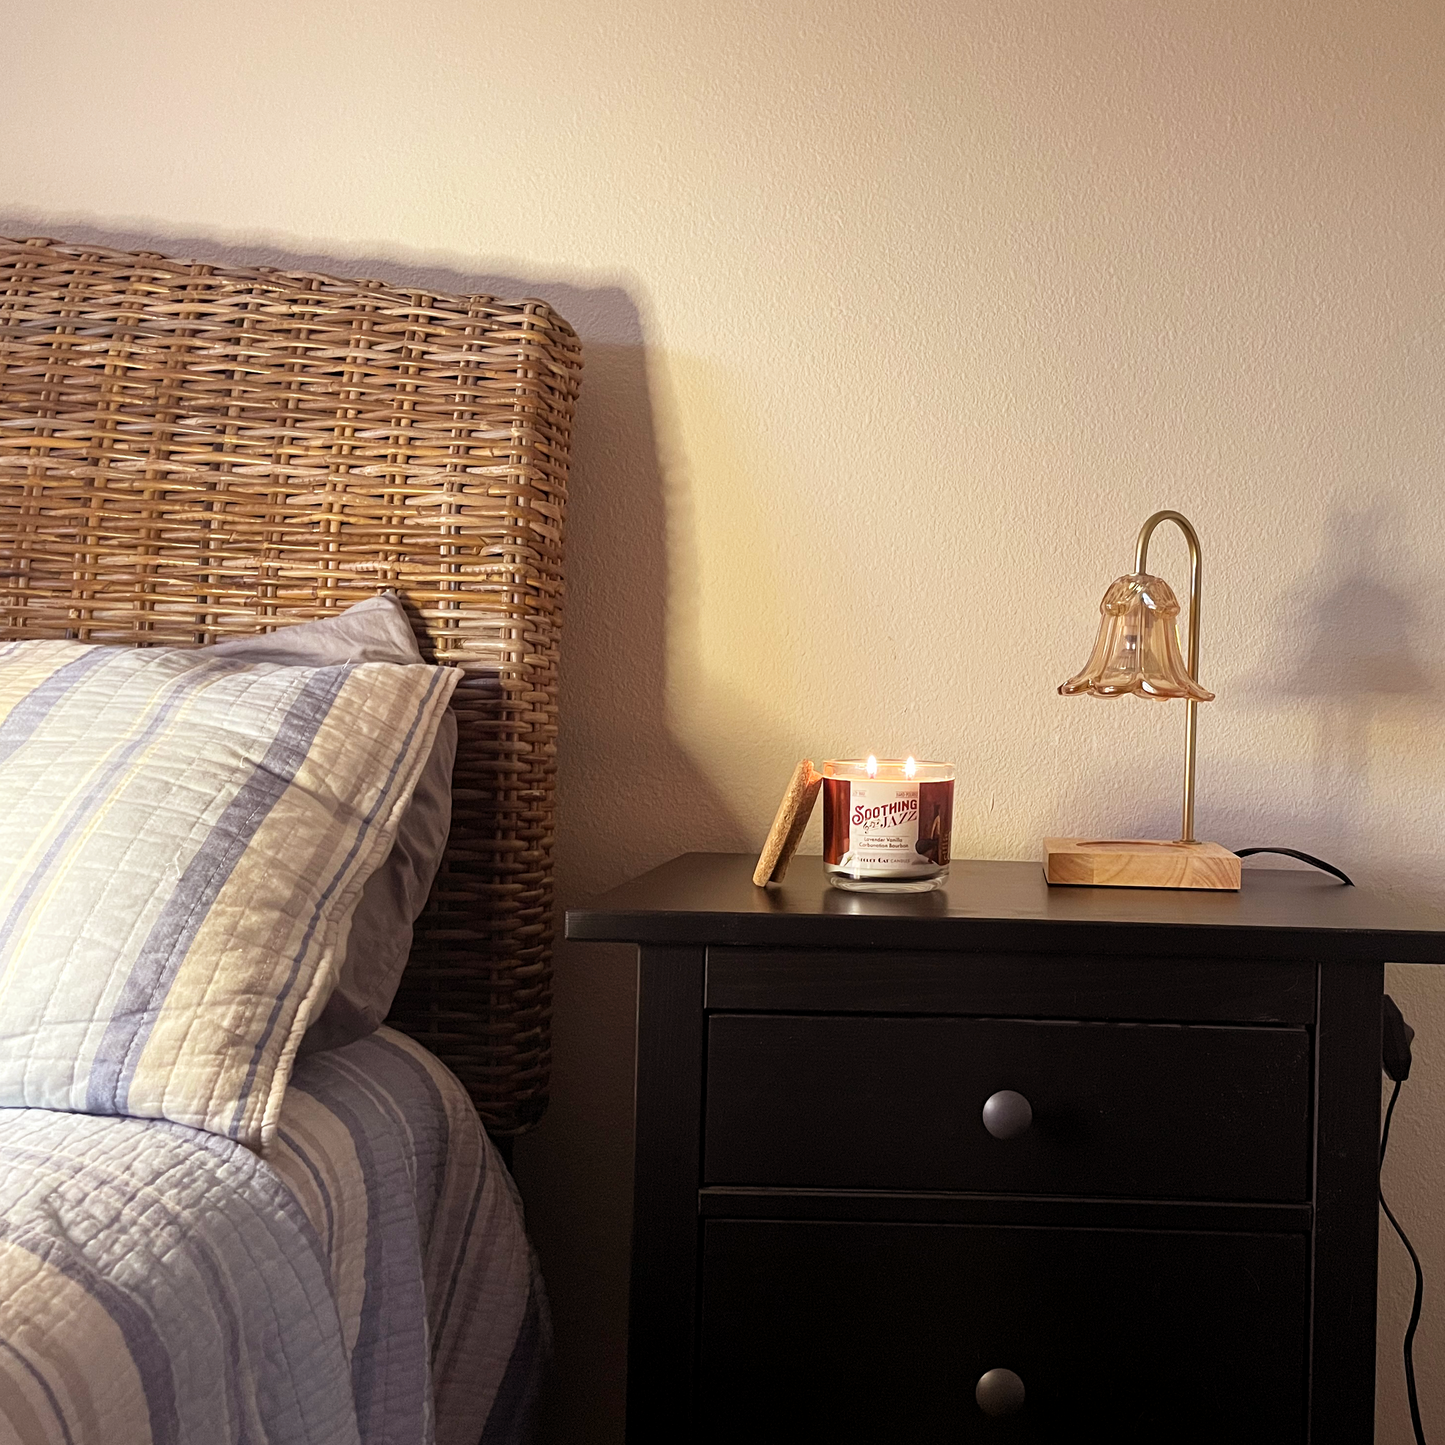 Bed scene with a lit candle on a nightstand next to a lamp with a bed on the left